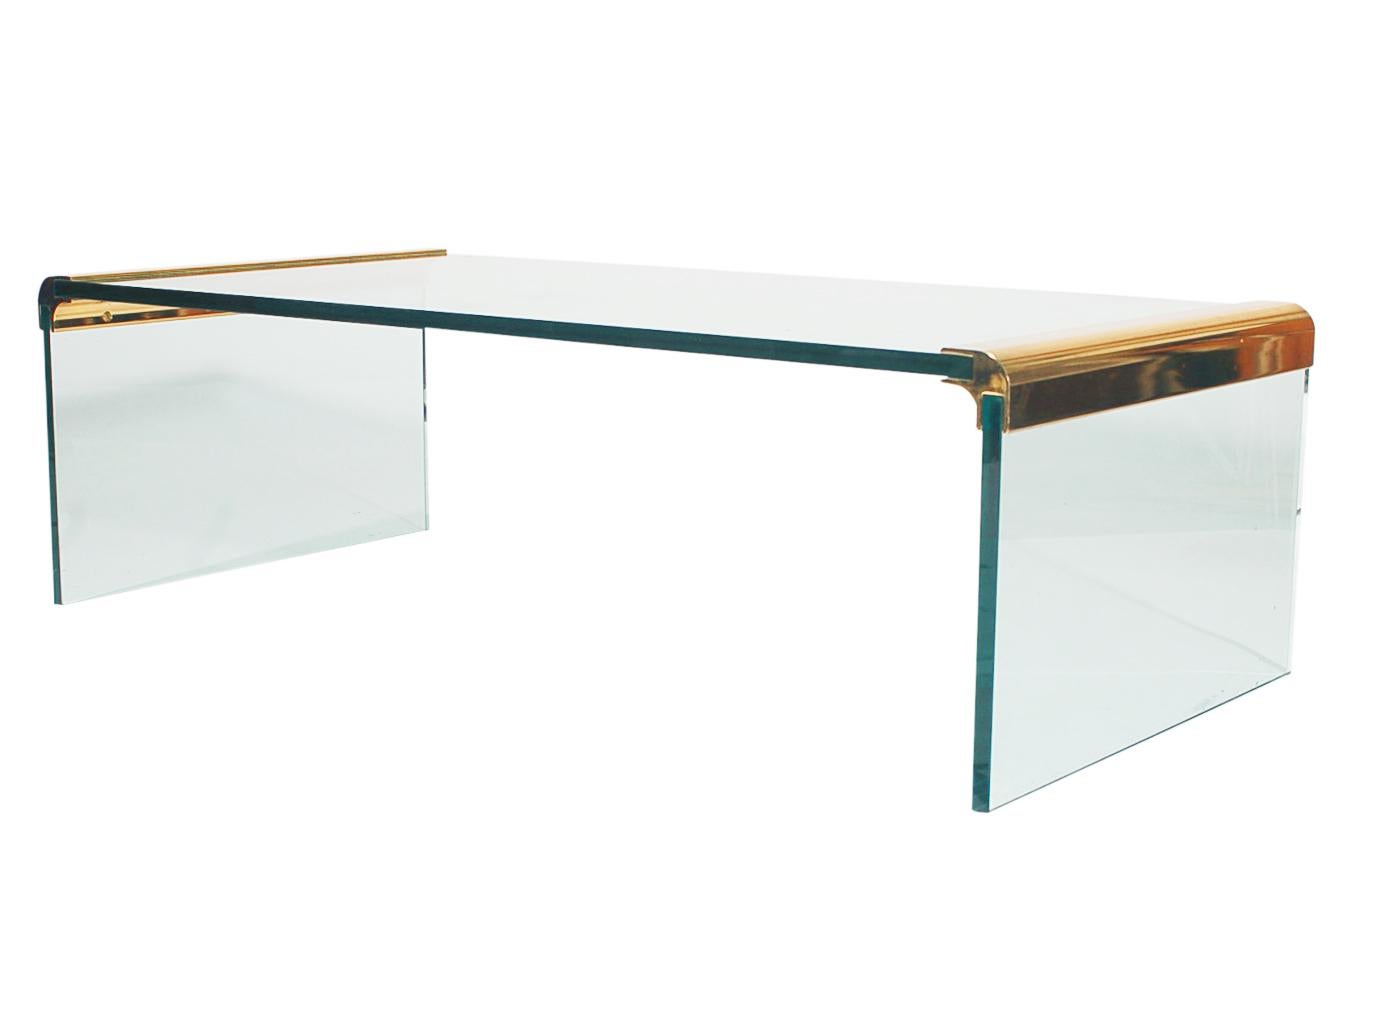 American Mid-Century Modern Leon Rosen for Pace Glass & Brass Waterfall Coffee Table